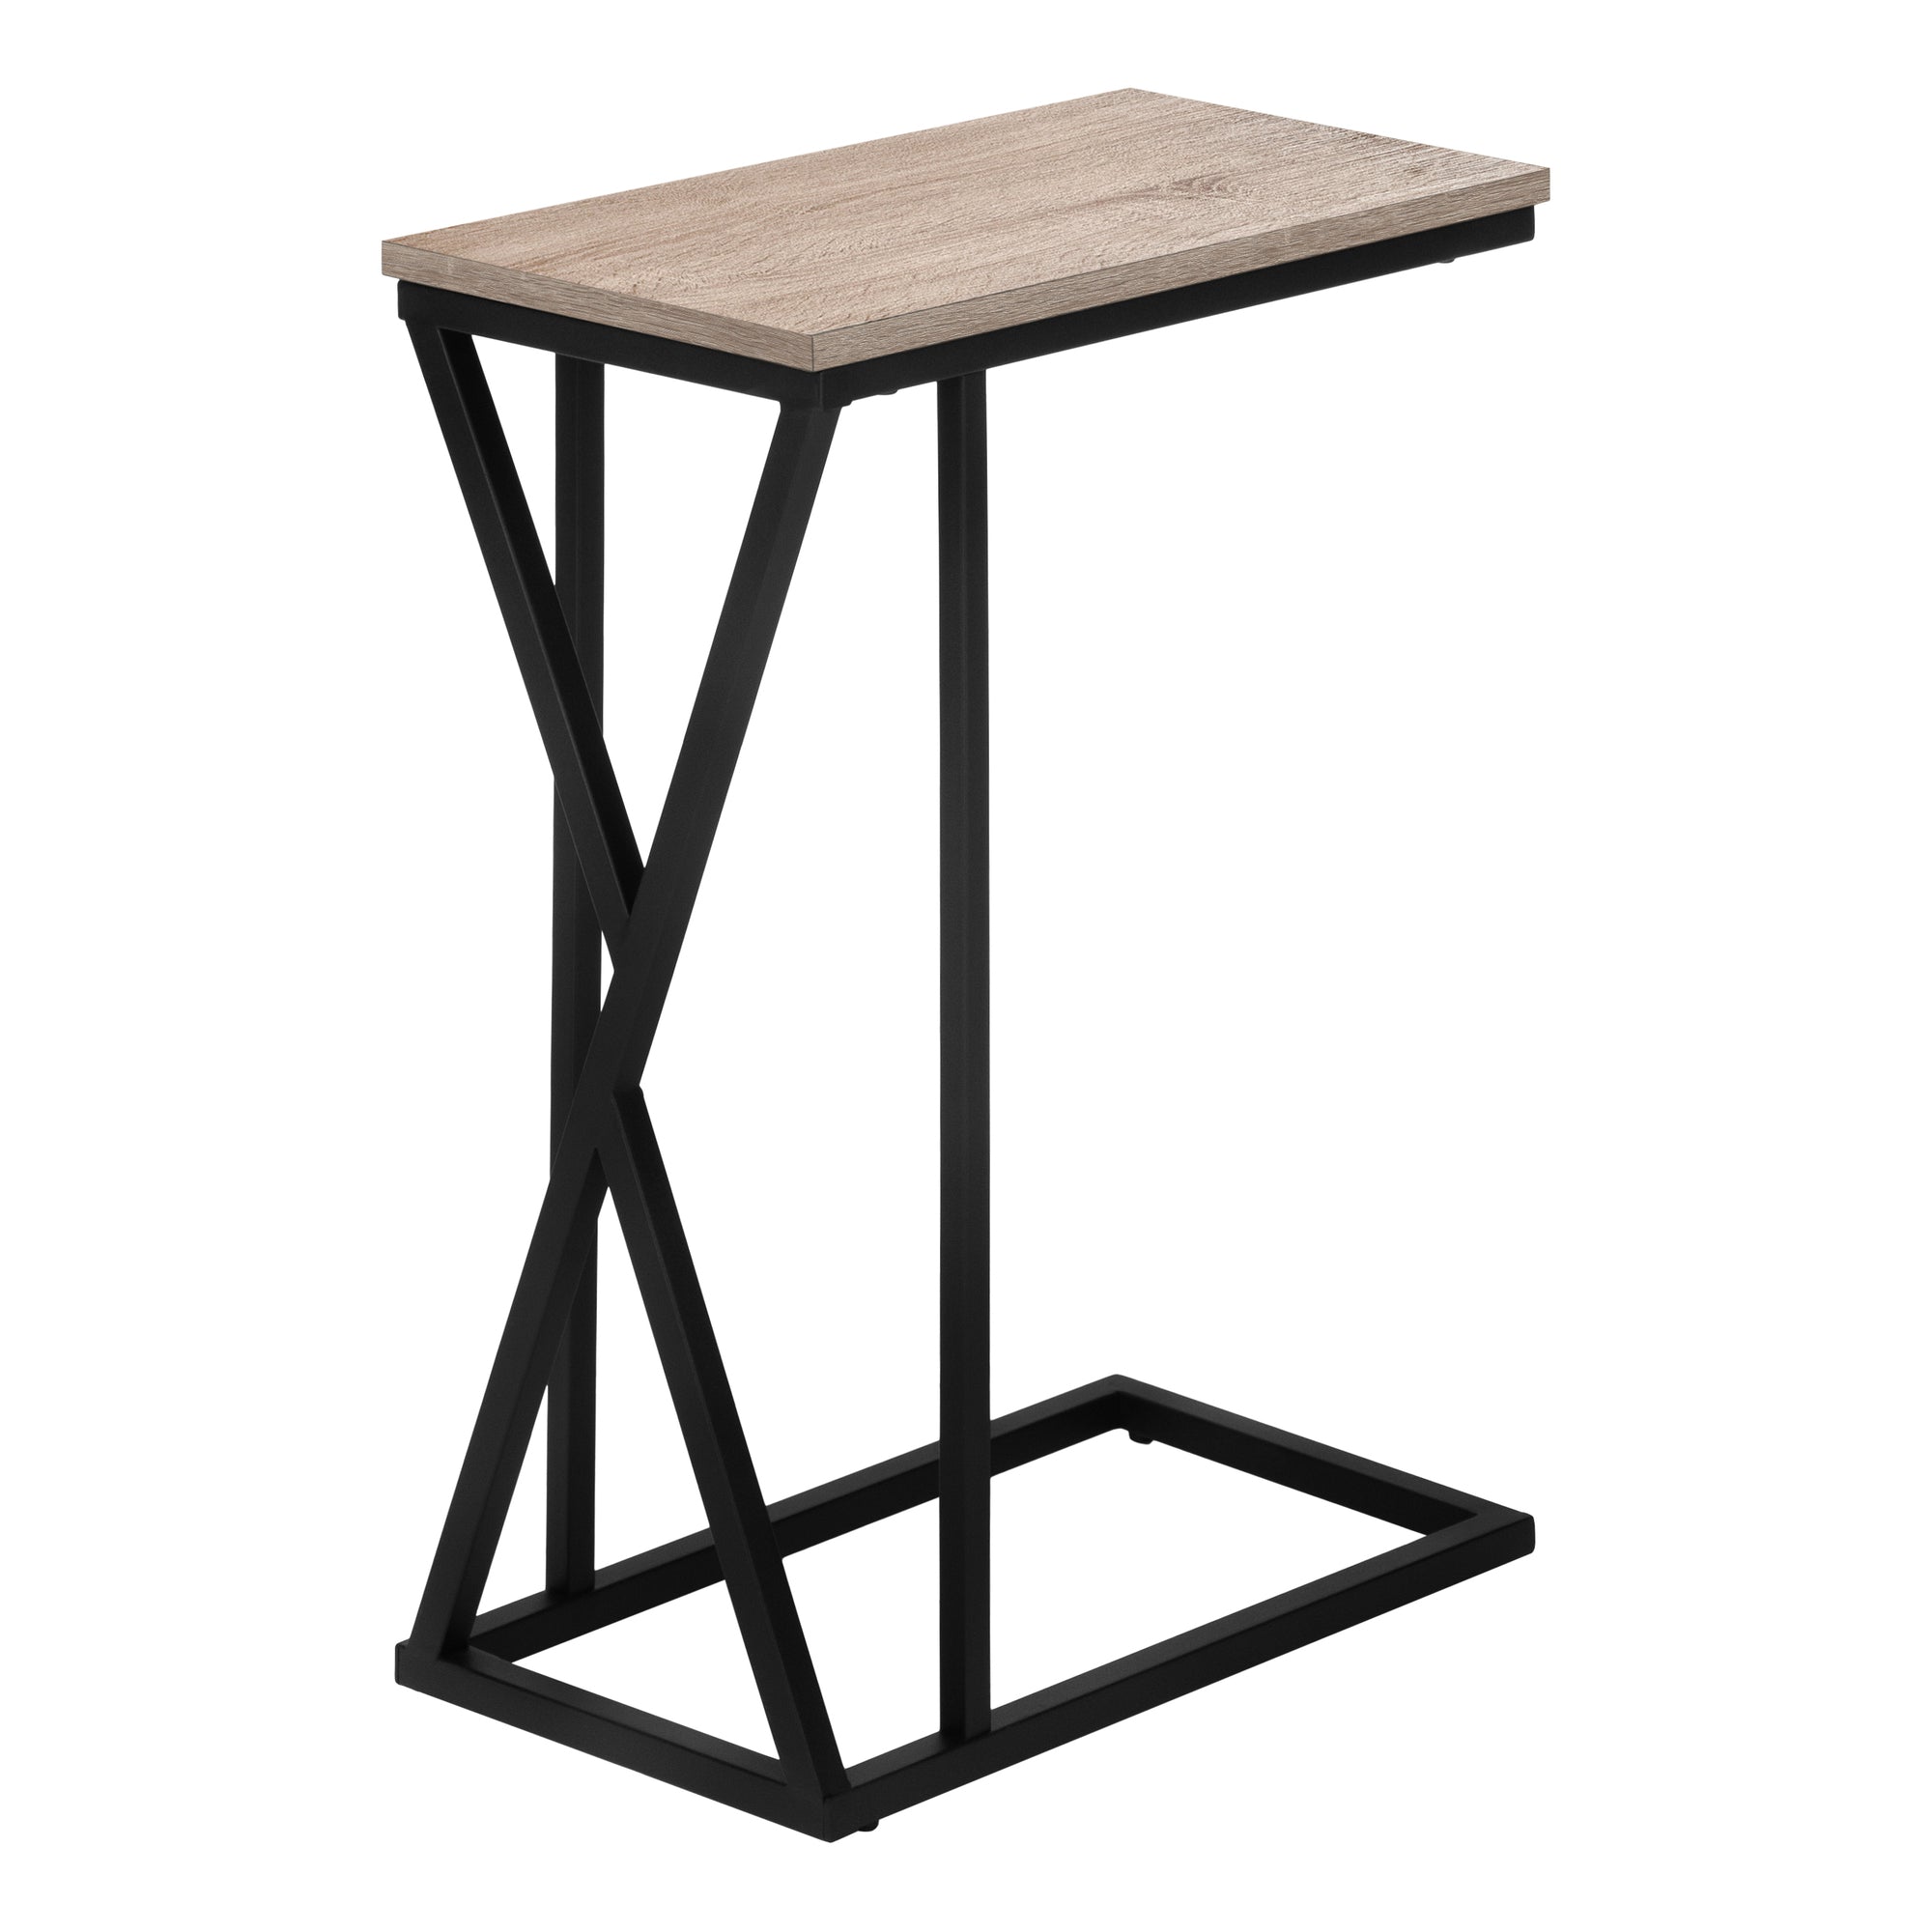 MN-863249    Accent Table, C-Shaped, End, Side, Snack, Living Room, Bedroom, Metal Legs, Laminate, Dark Taupe, Black, Contemporary, Modern